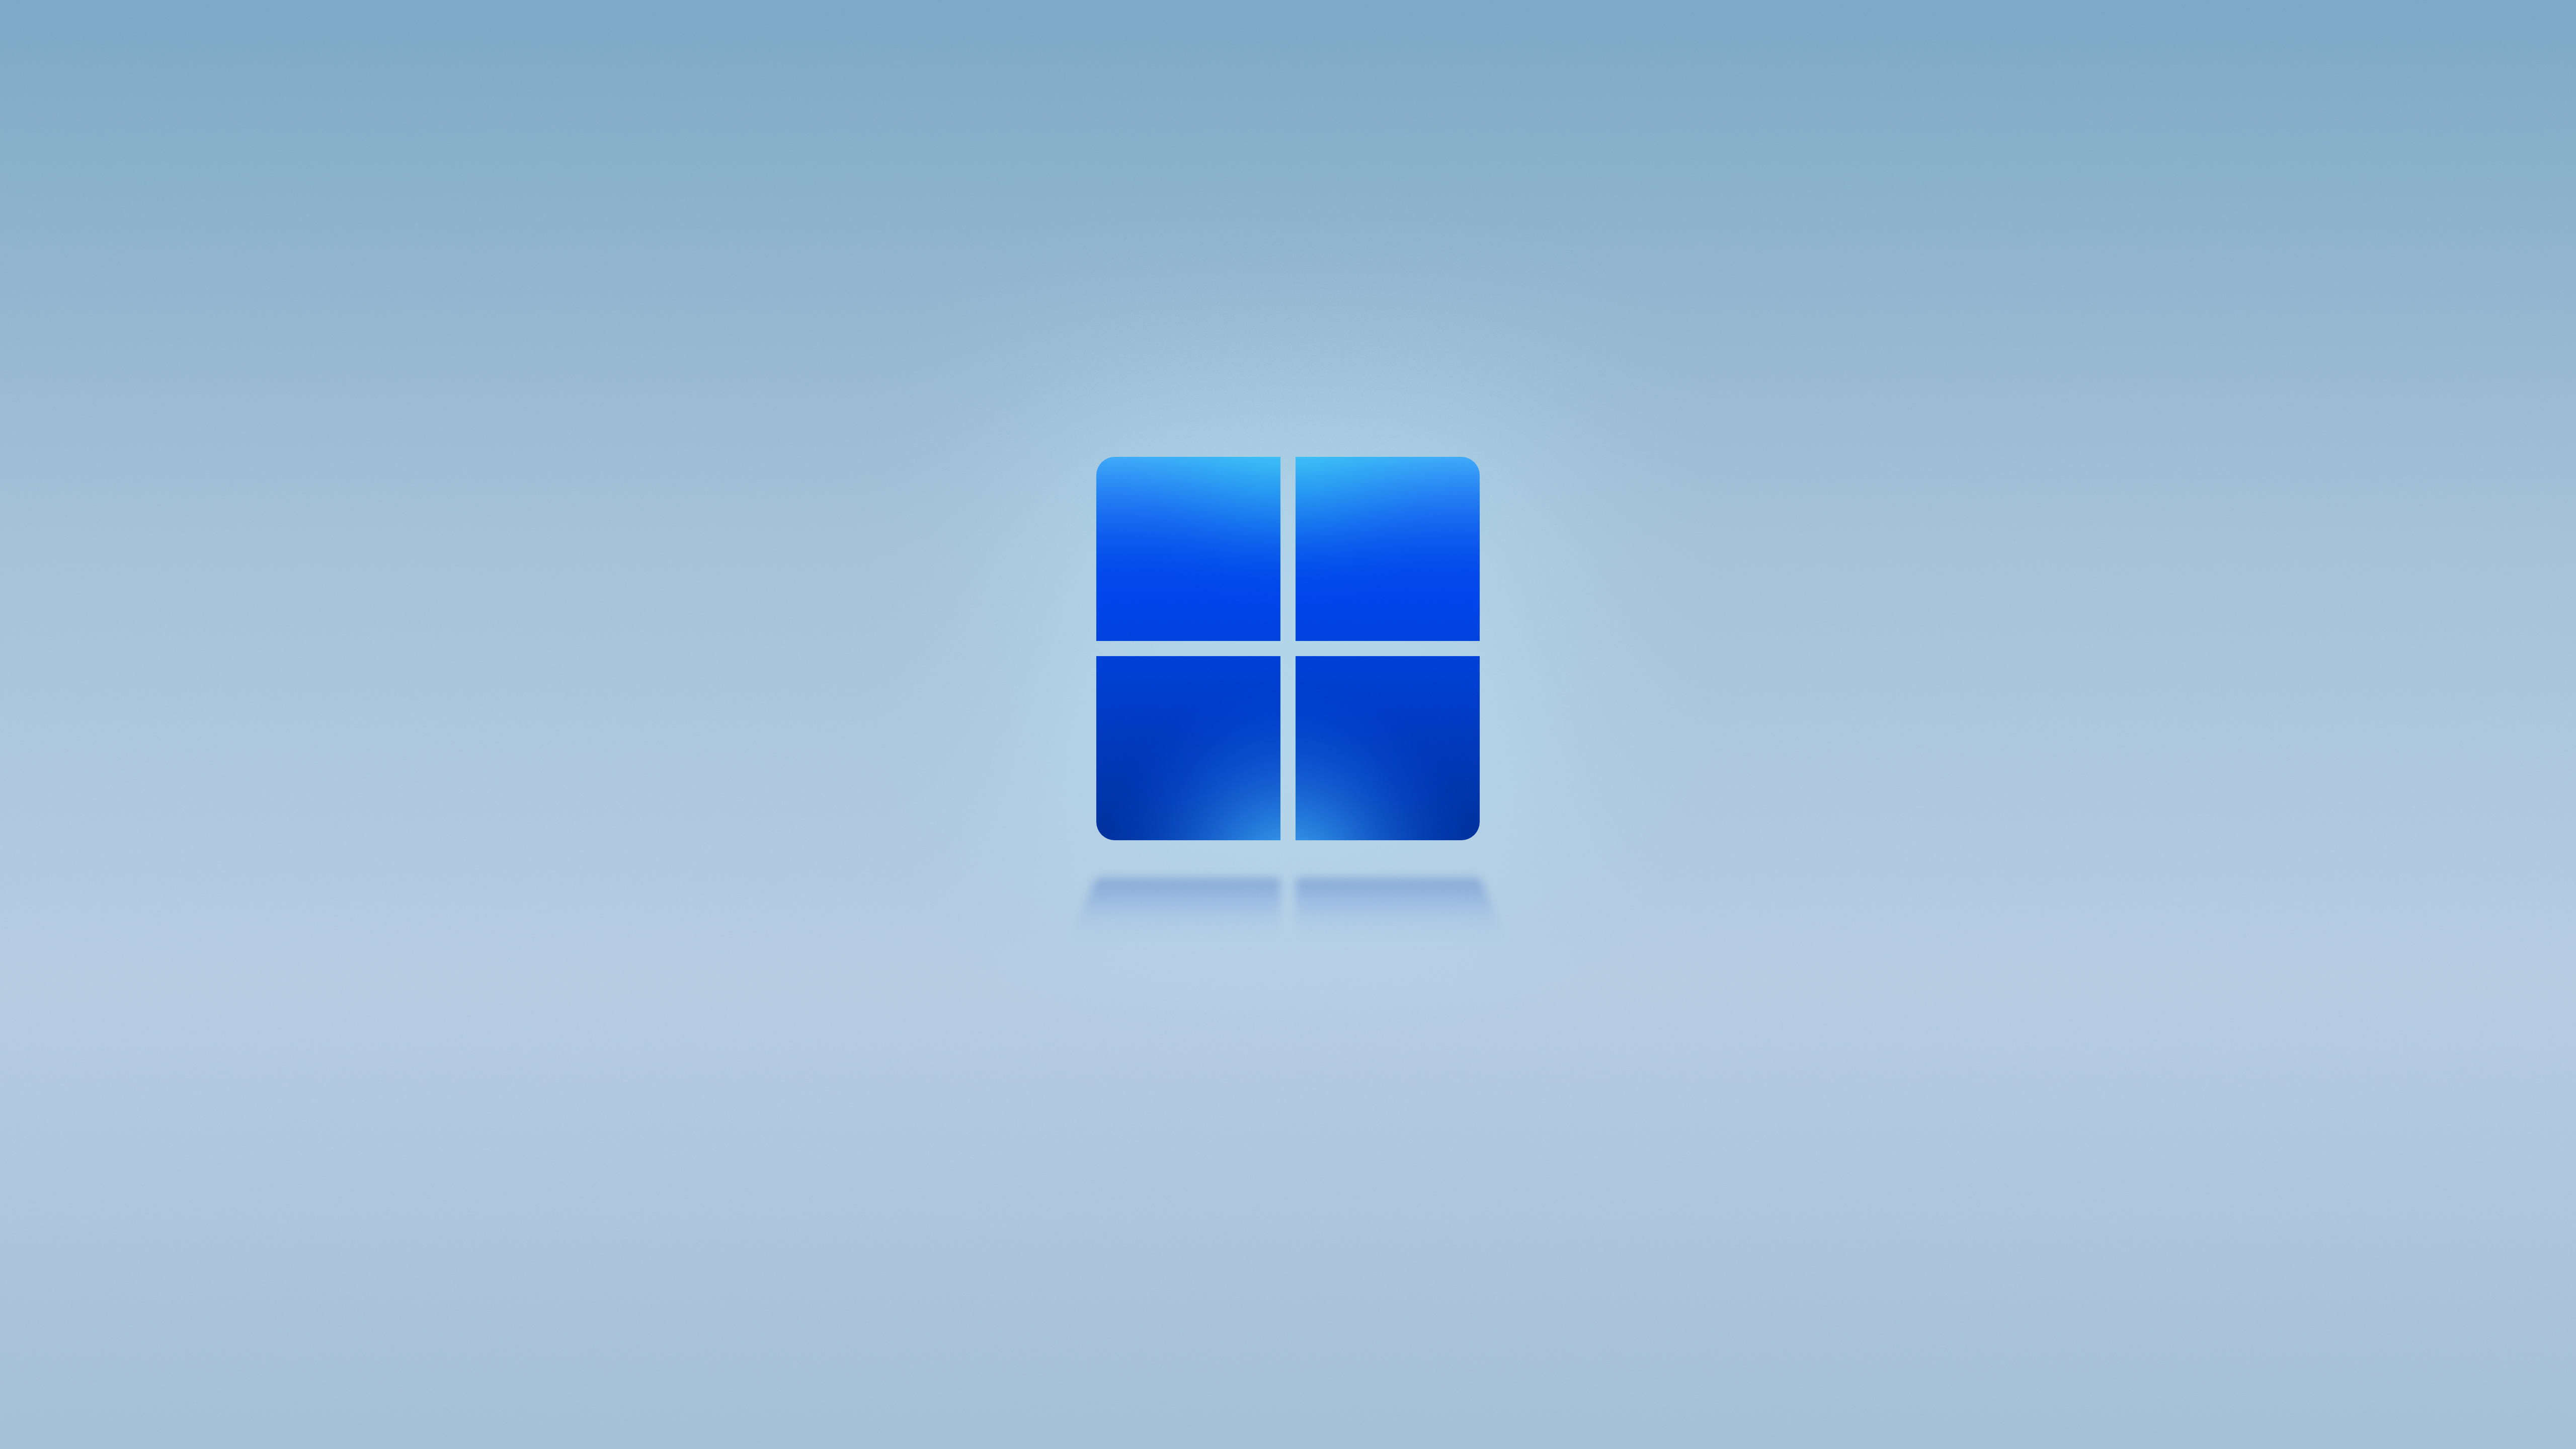 Windows 11: Download the default wallpapers in 4K and other resolutions -  Pureinfotech